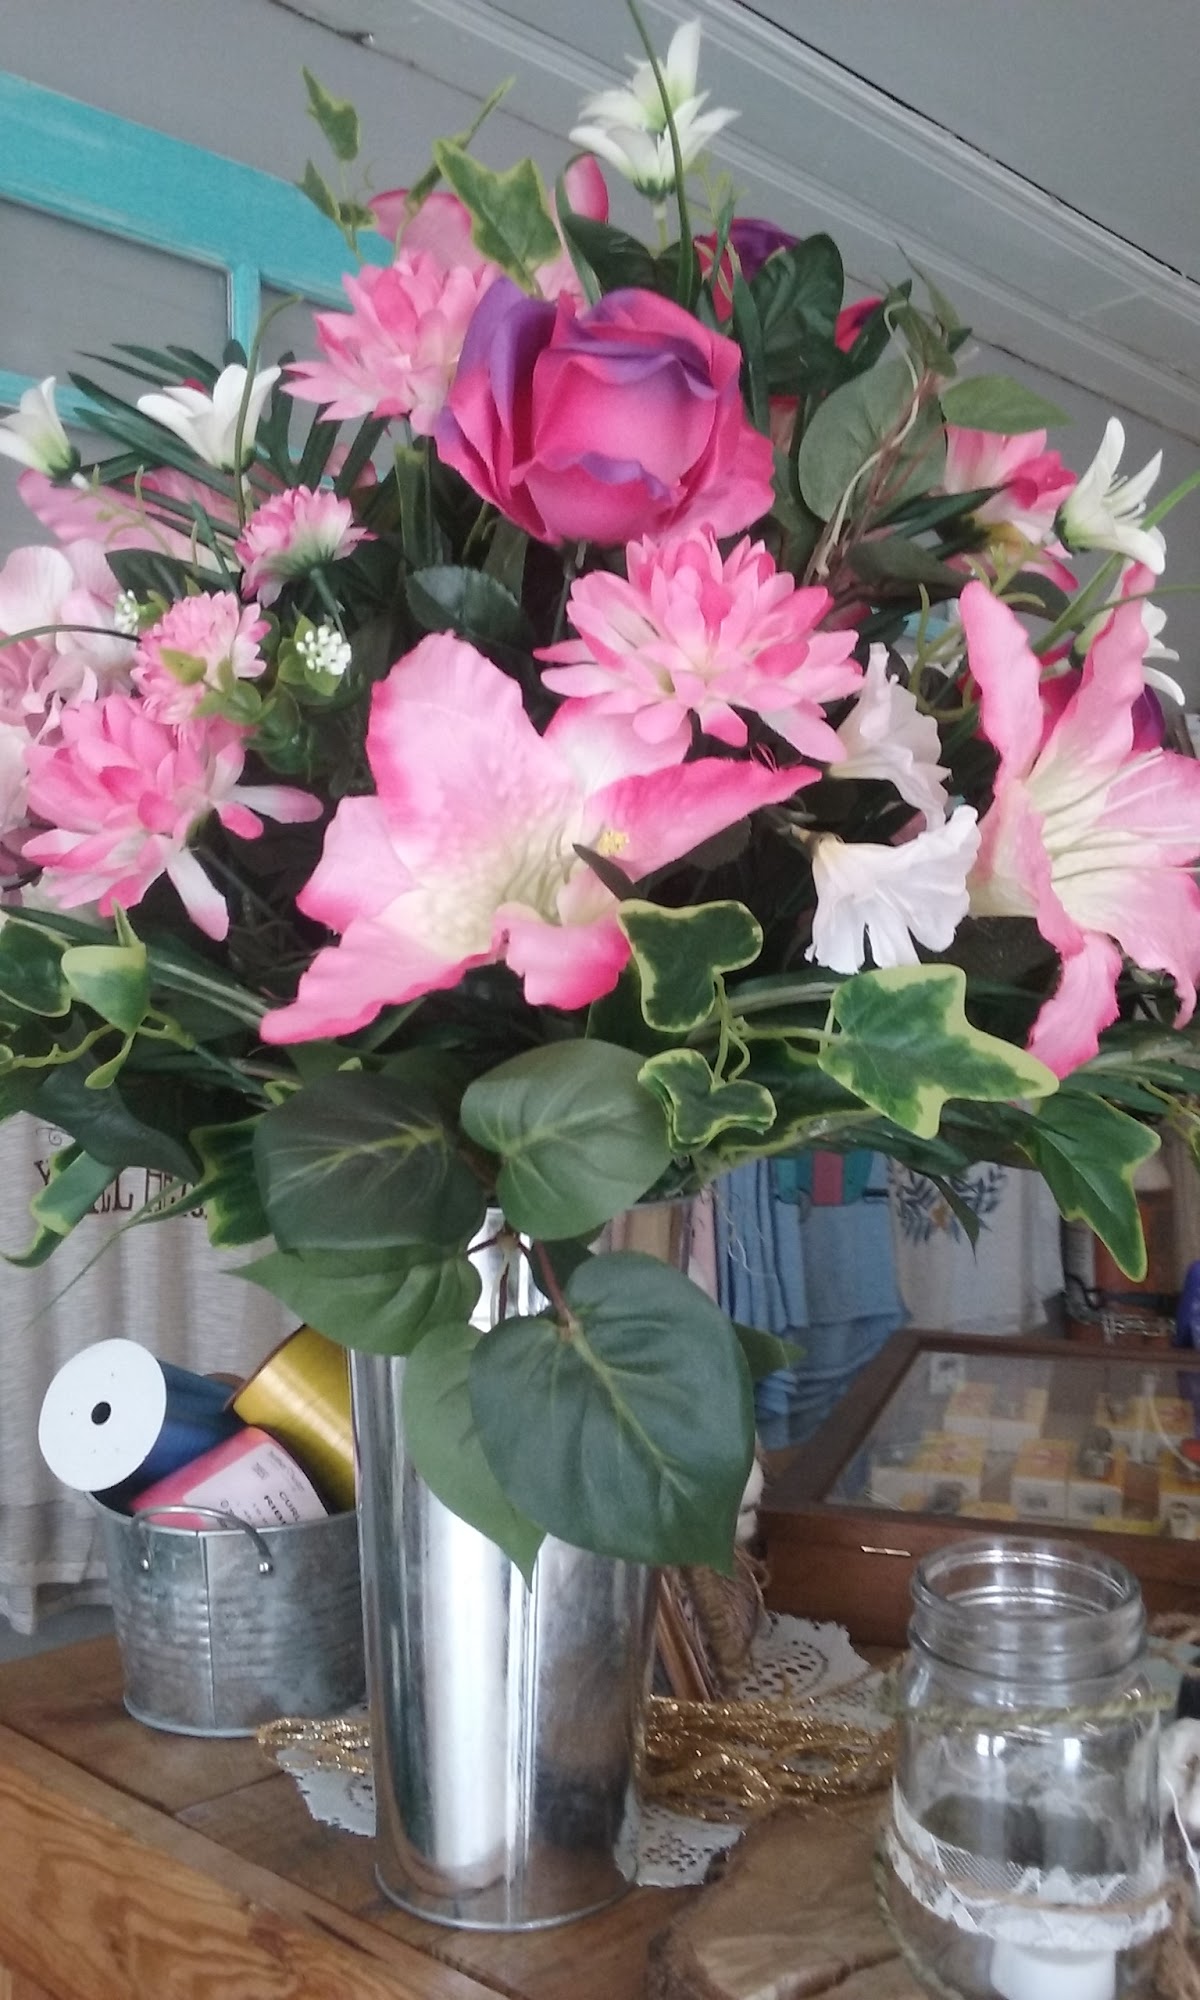 Ellie's Flowers & Gifts 599 Avenue H, Moore Haven Florida 33471